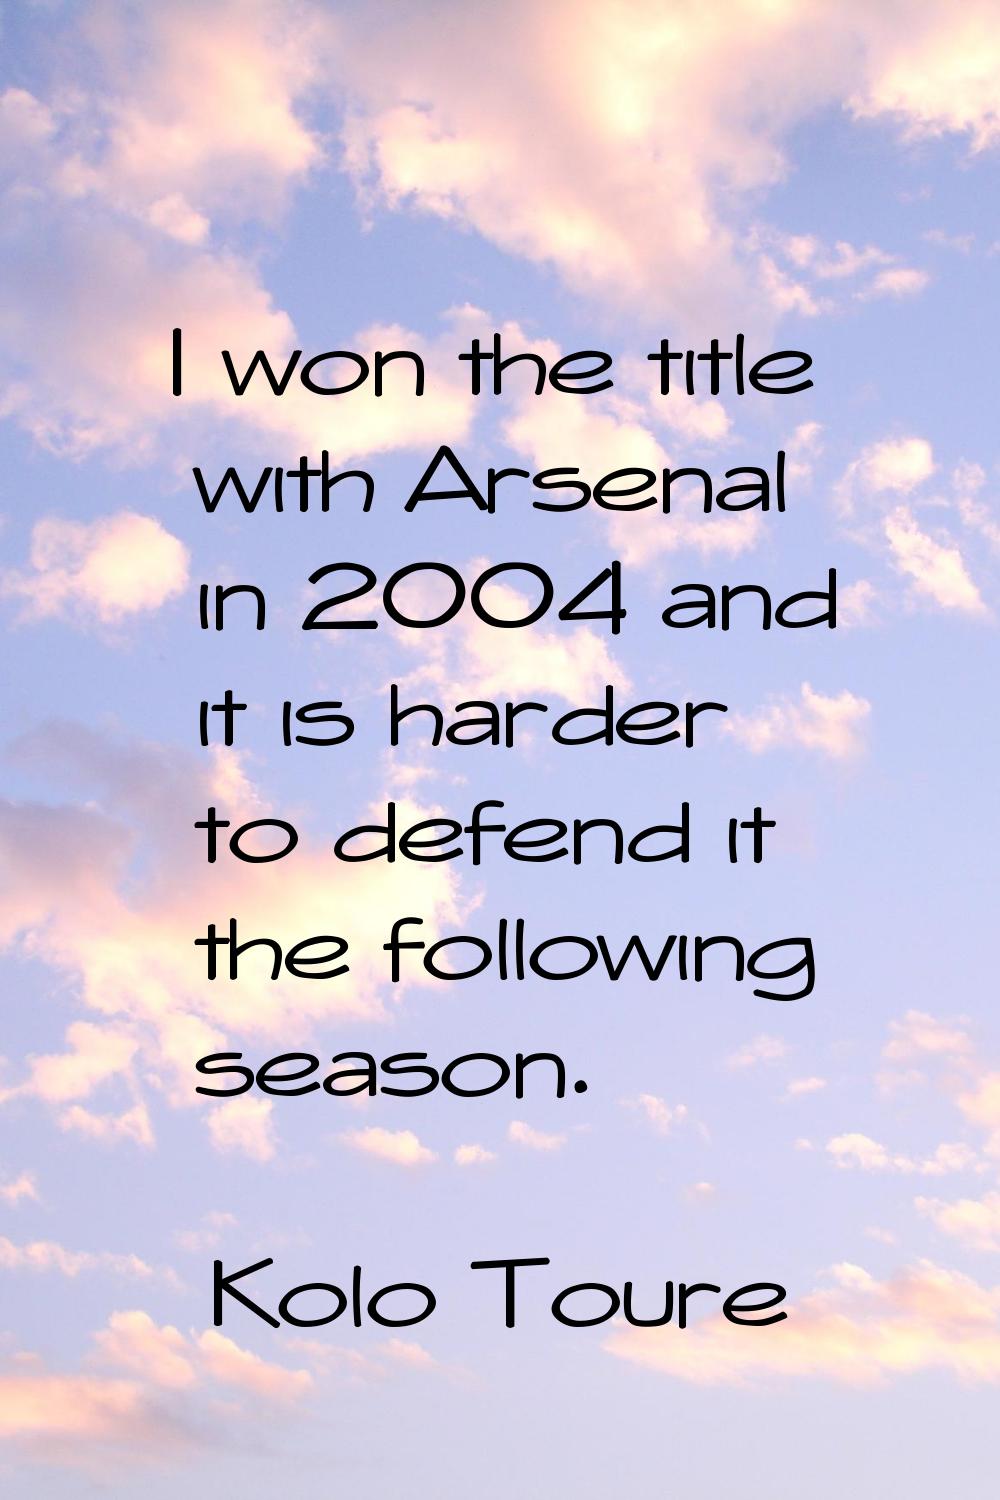 I won the title with Arsenal in 2004 and it is harder to defend it the following season.